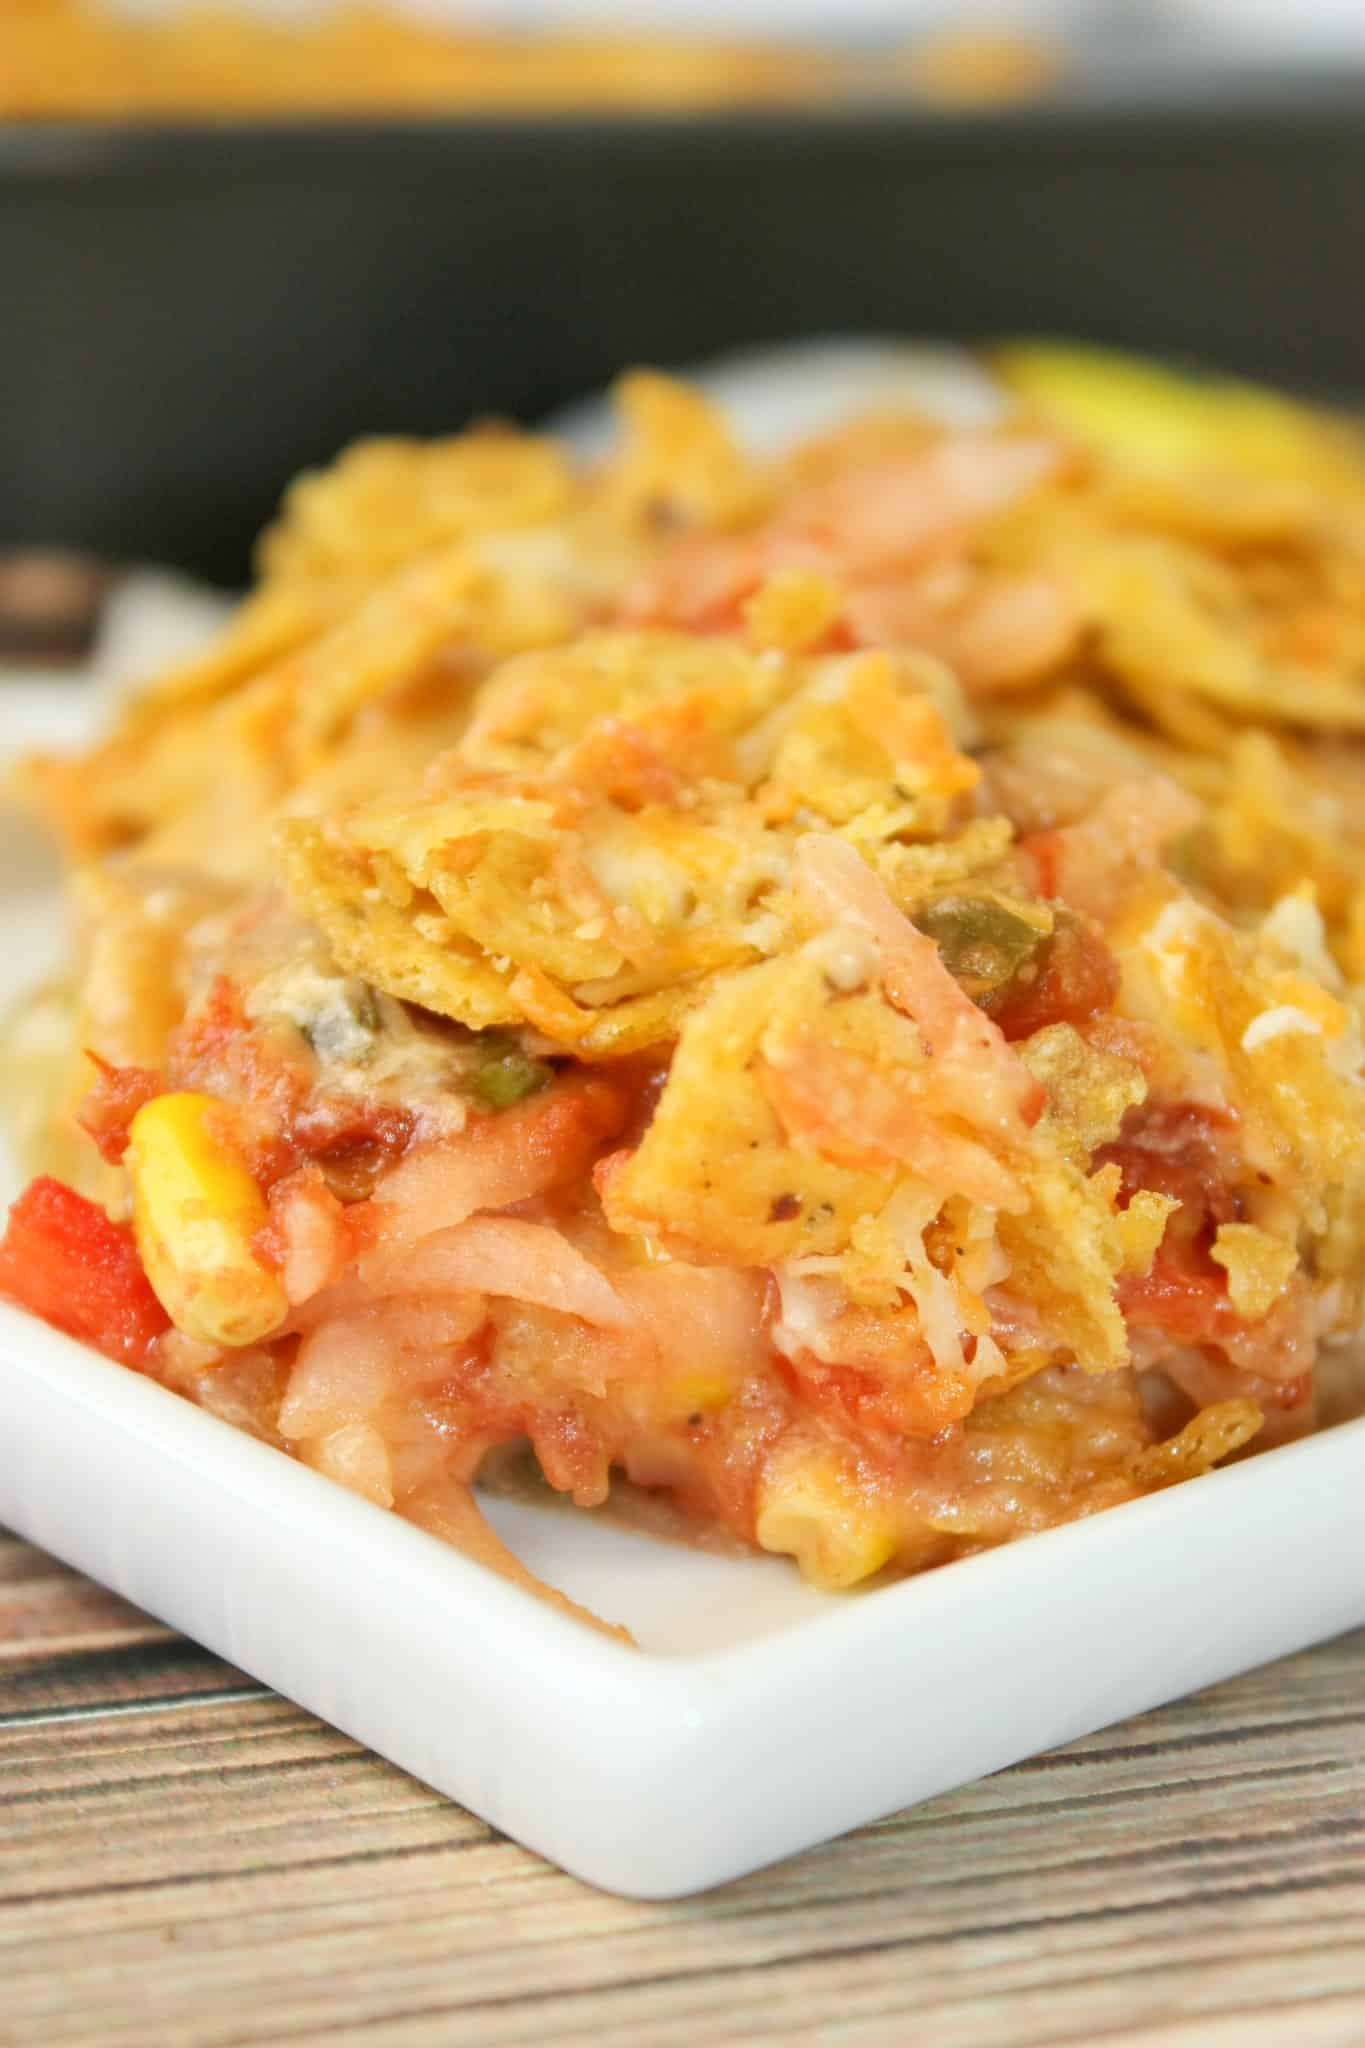 Mexican Potato Casserole is an easy side dish that is sure to be a hit with young and old alike!   The crispy topping is the perfect complement to the cheesy, potato base.